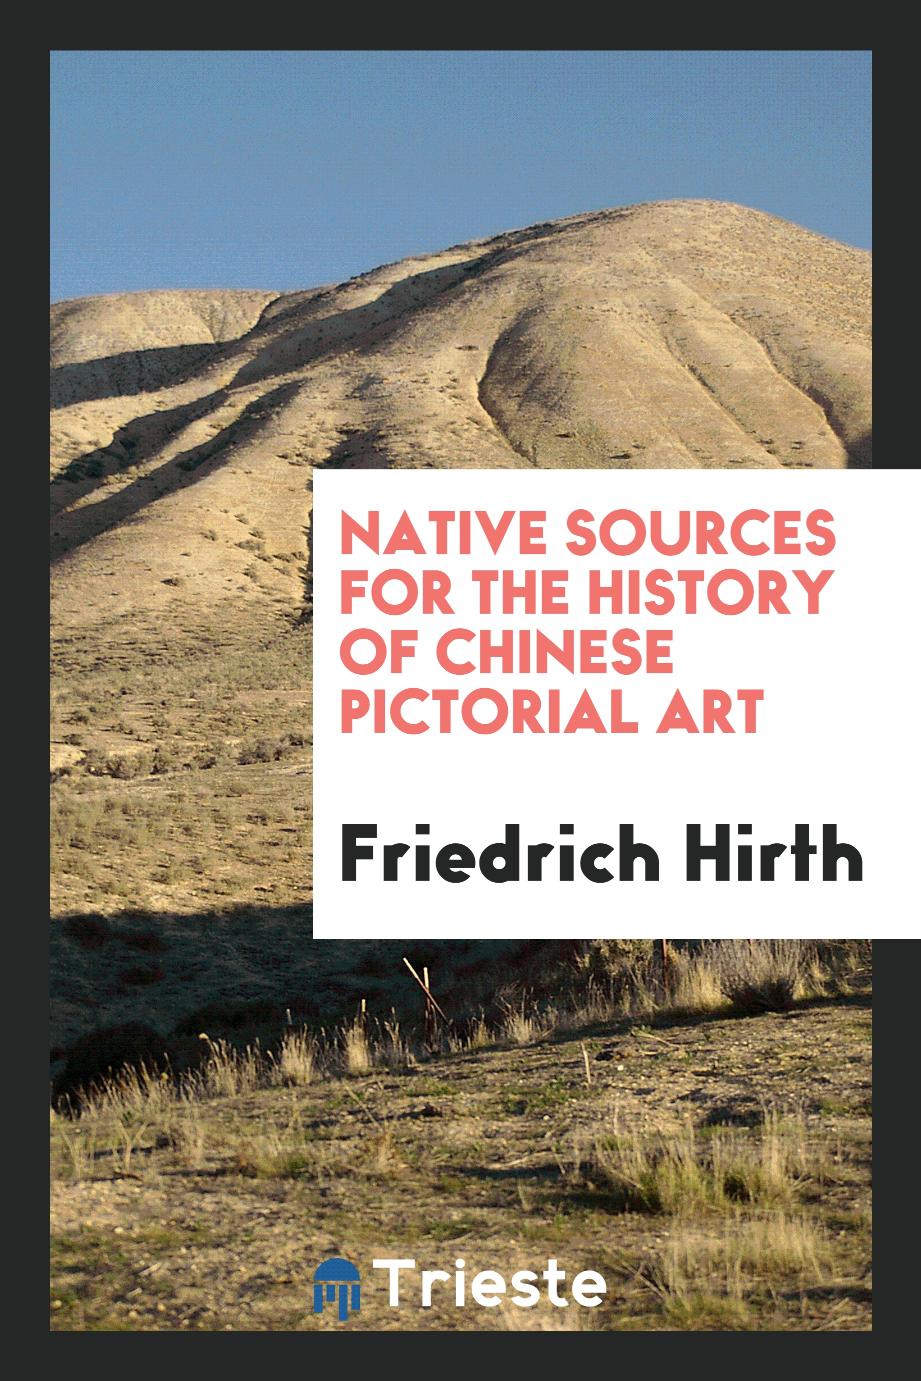 Native sources for the history of Chinese pictorial art